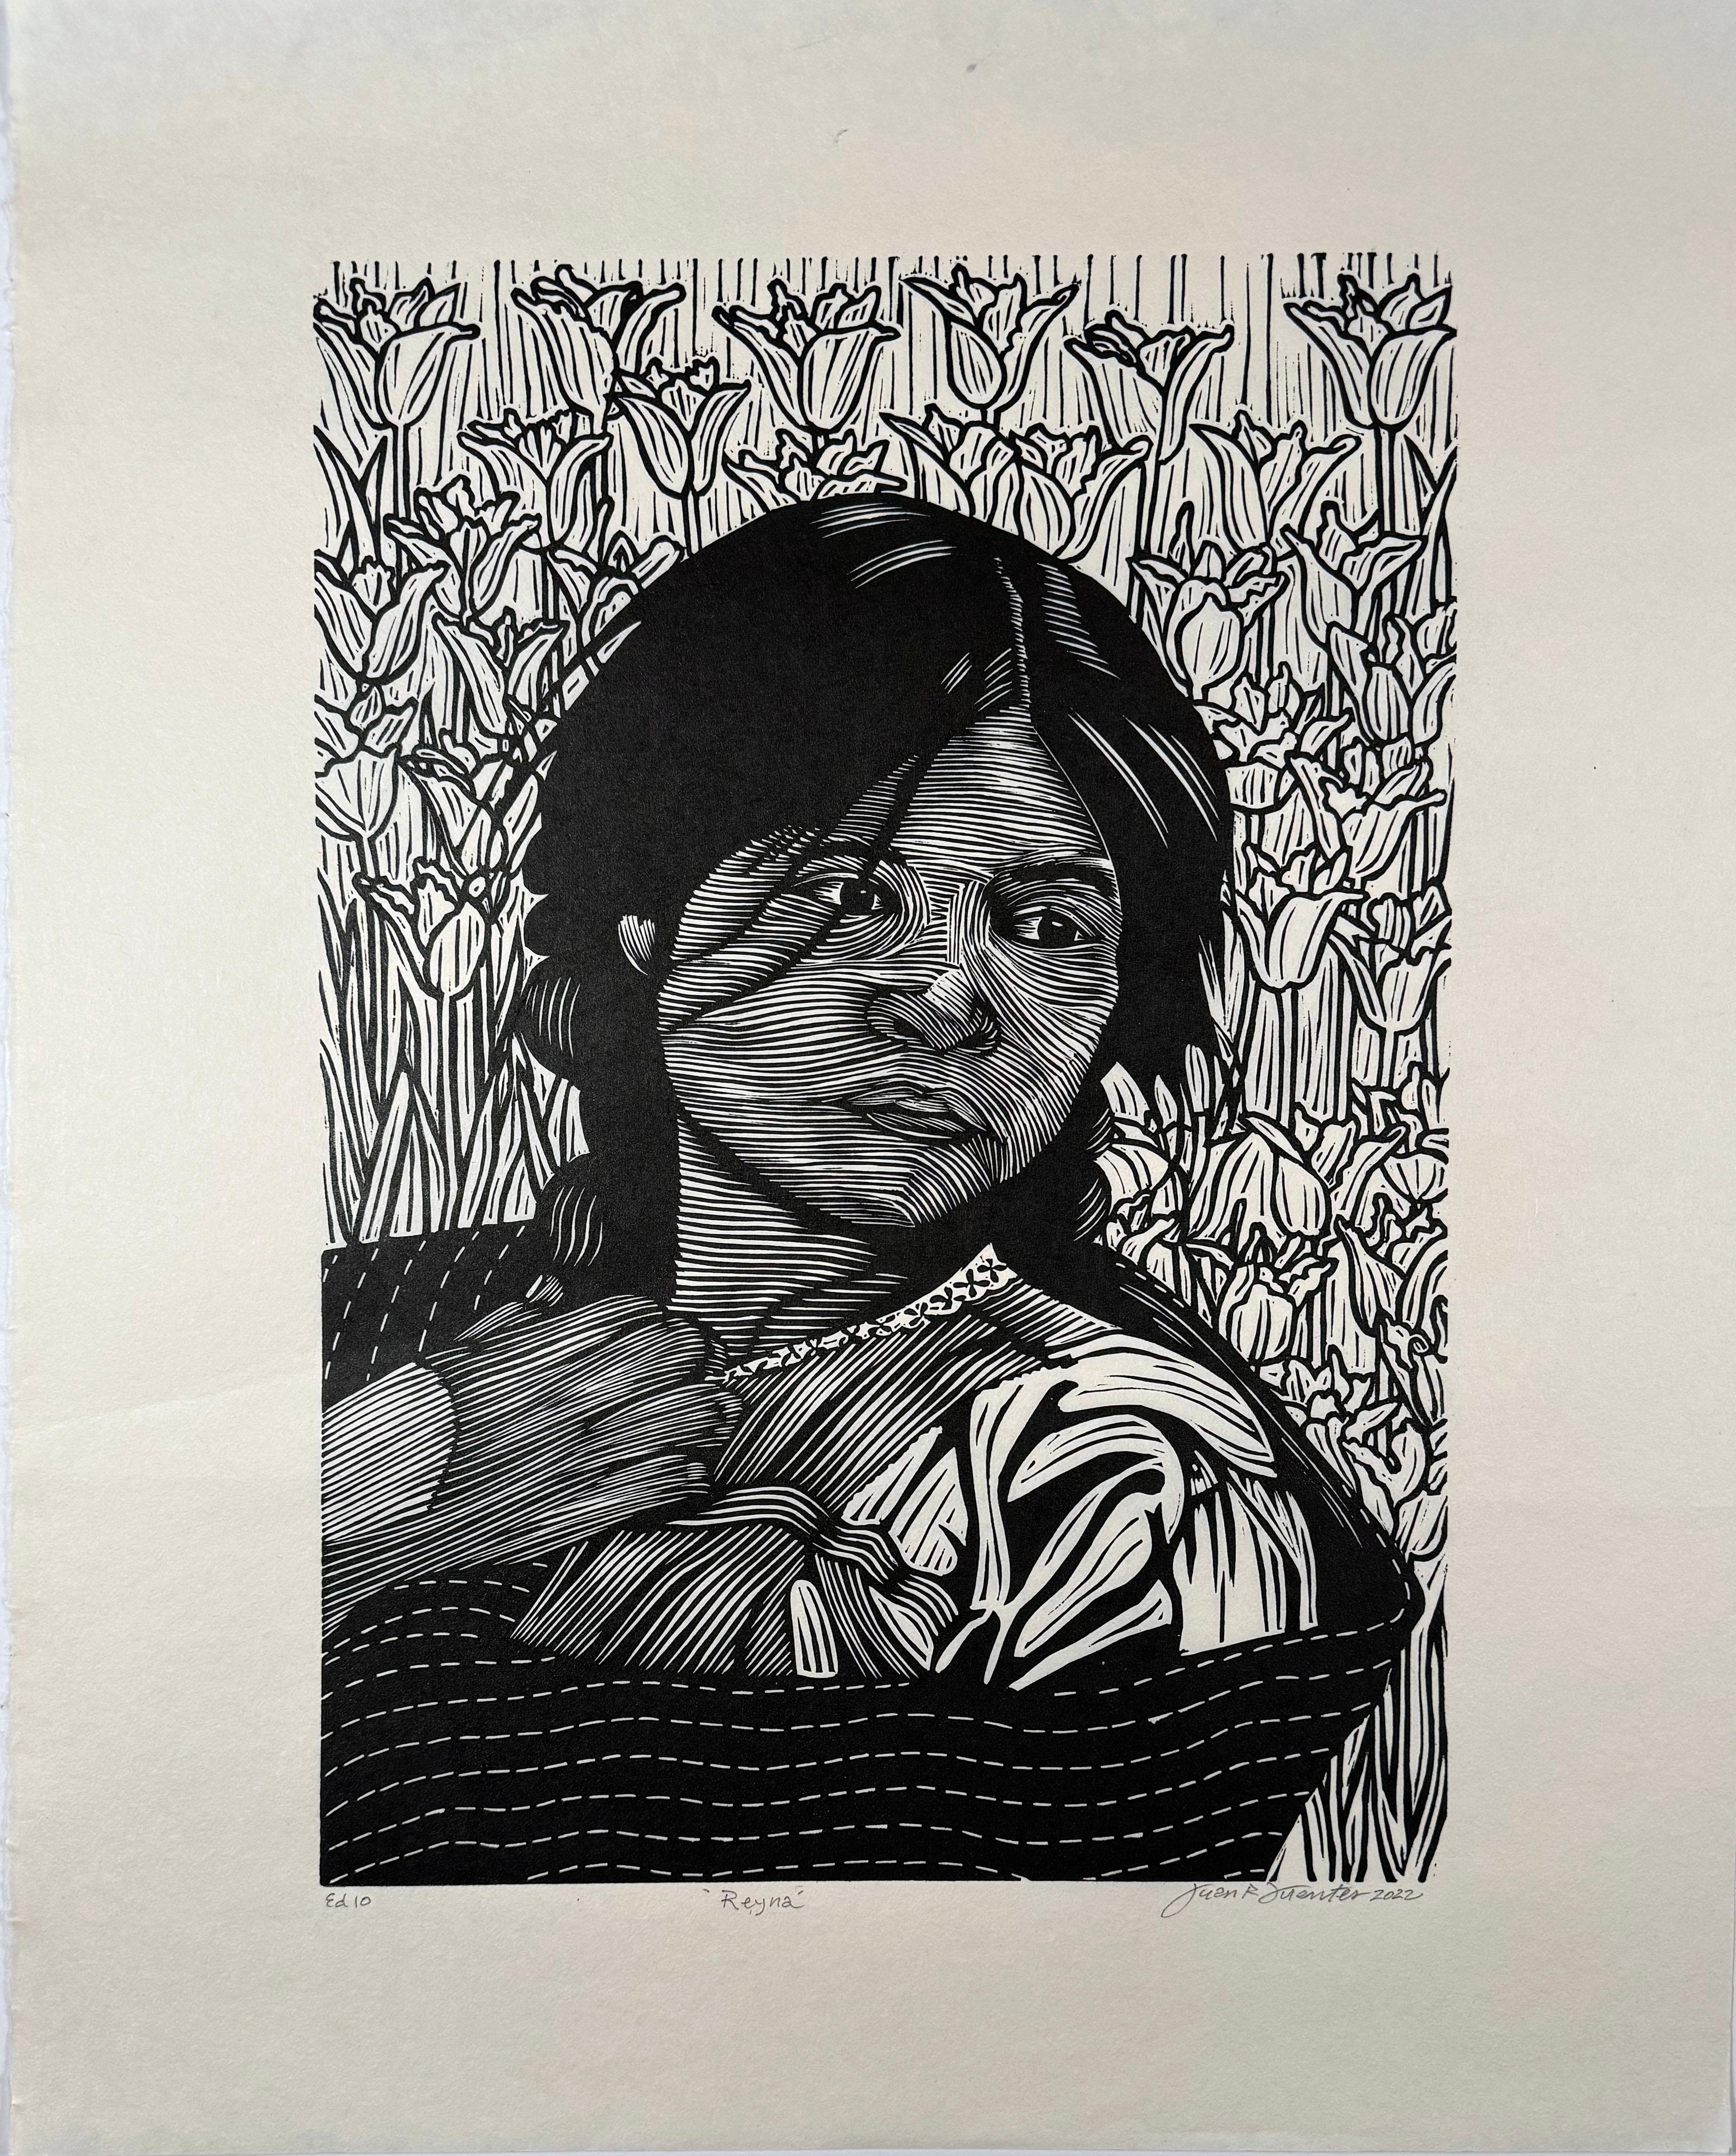 Medium: linocut
Year: 2022
Image Size: 18 x 12 inches
Edition size: 10

Young indigenous girl against a backdrop of flowers.

As a cultural activist/artist/printmaker, Juan Fuentes has dedicated his career to being part of a global movement for